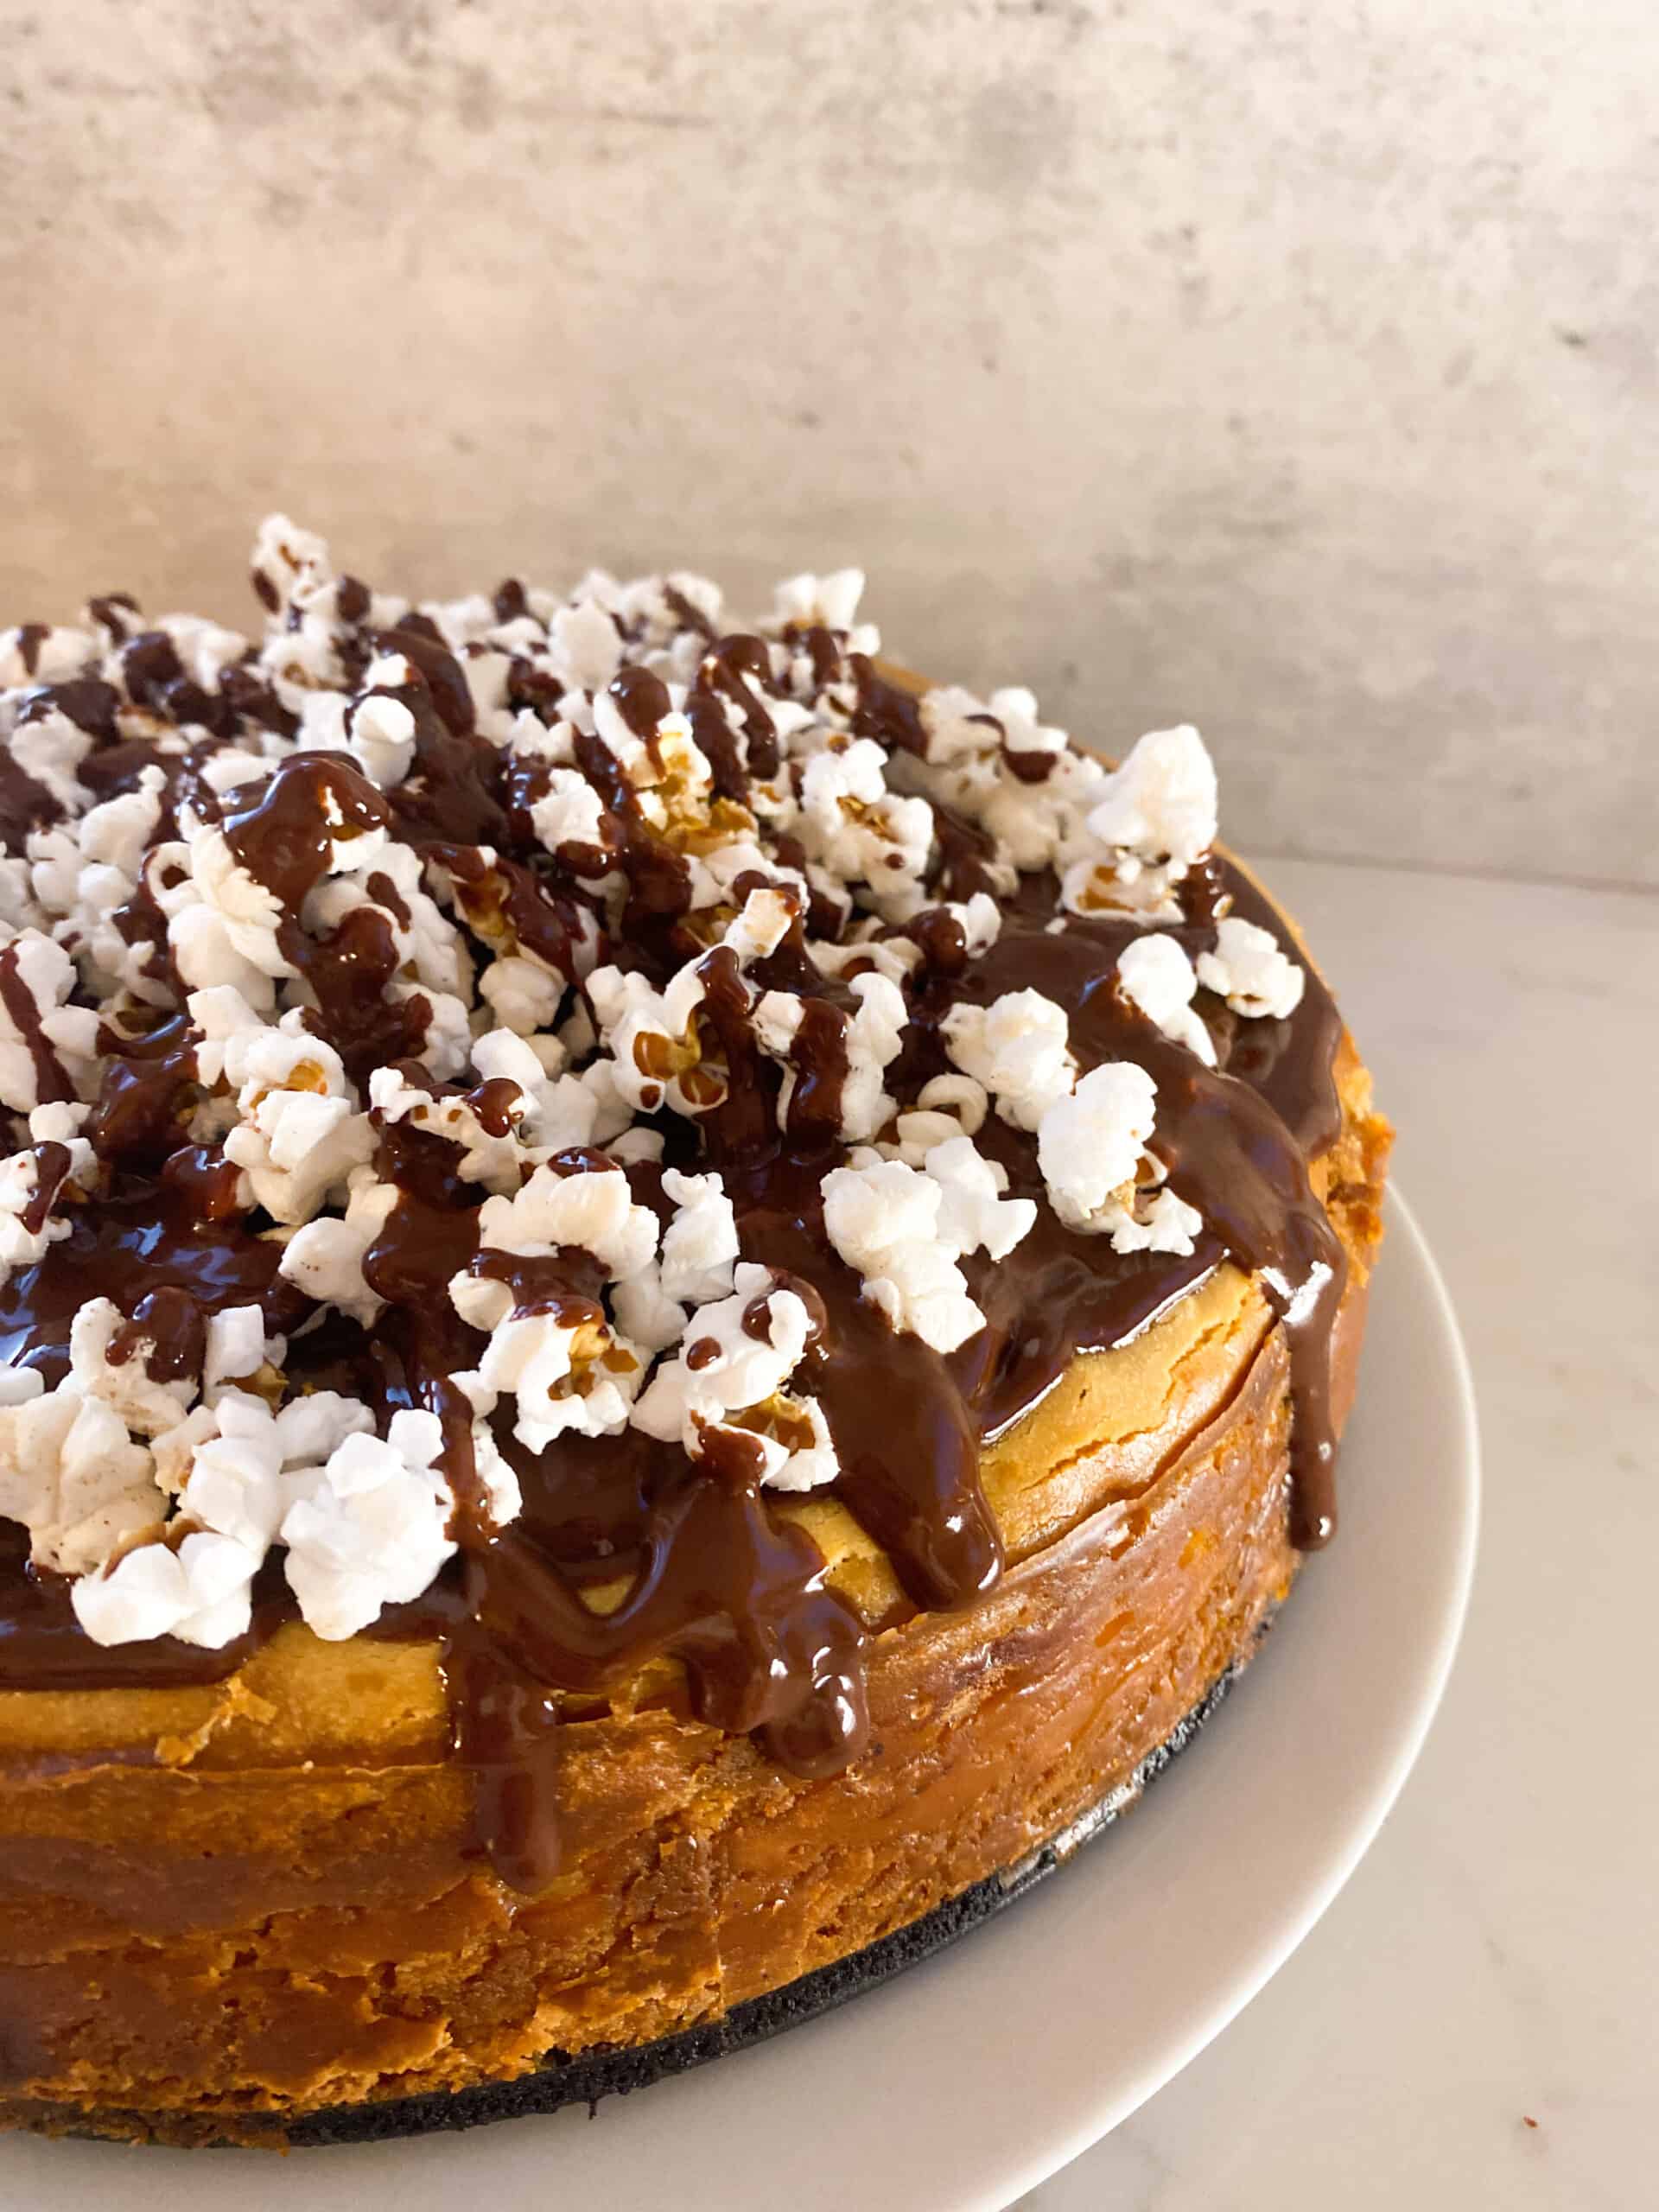 Chocolate Peanut Butter Cheesecake with Popcorn on Top | CC's Table